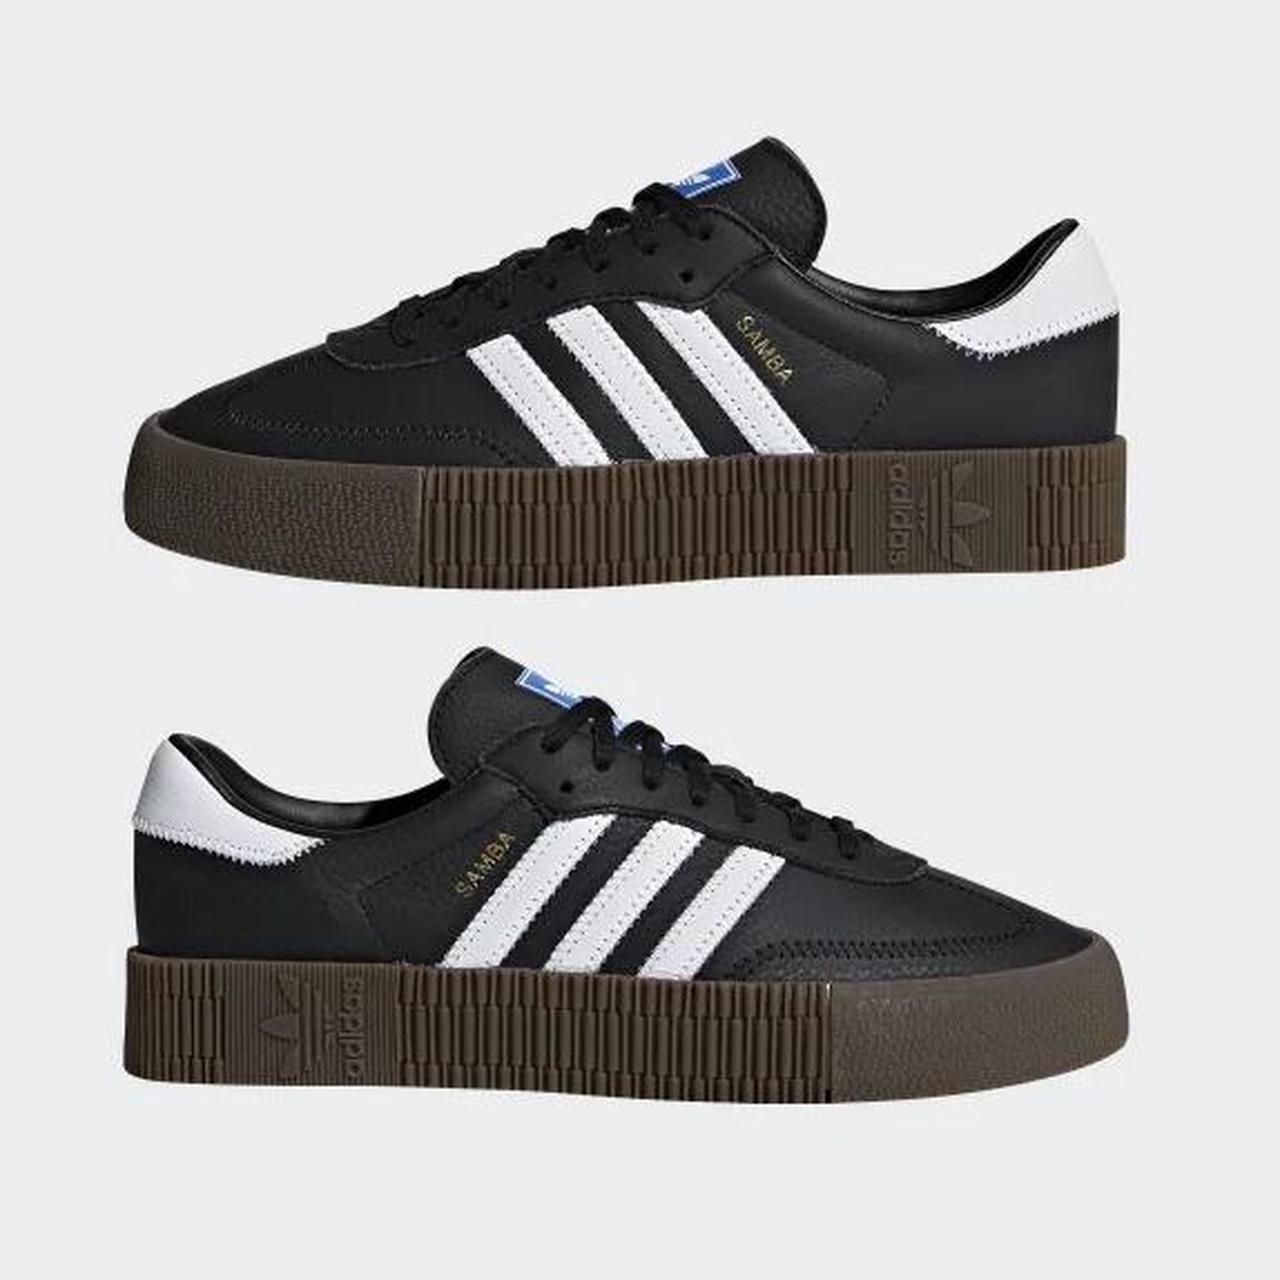 Adidas Women's Black and Brown Trainers